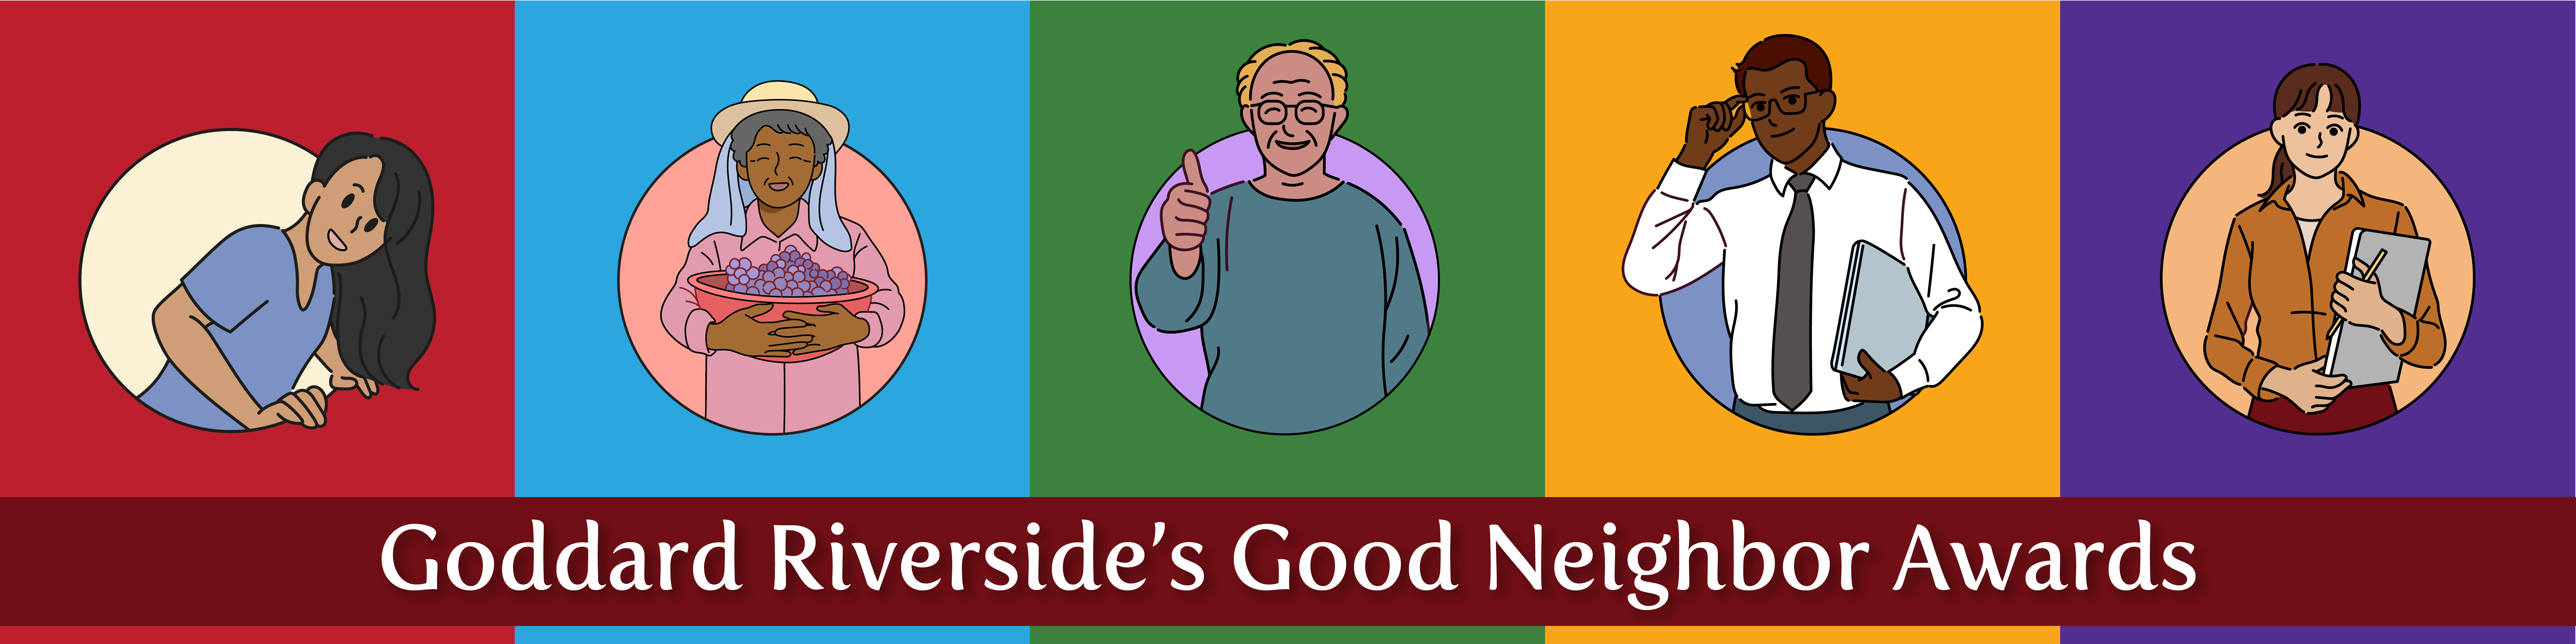 "Goddard Riverside's Good Neighbor Awards" title on top of a graphic with illustrations of different people.